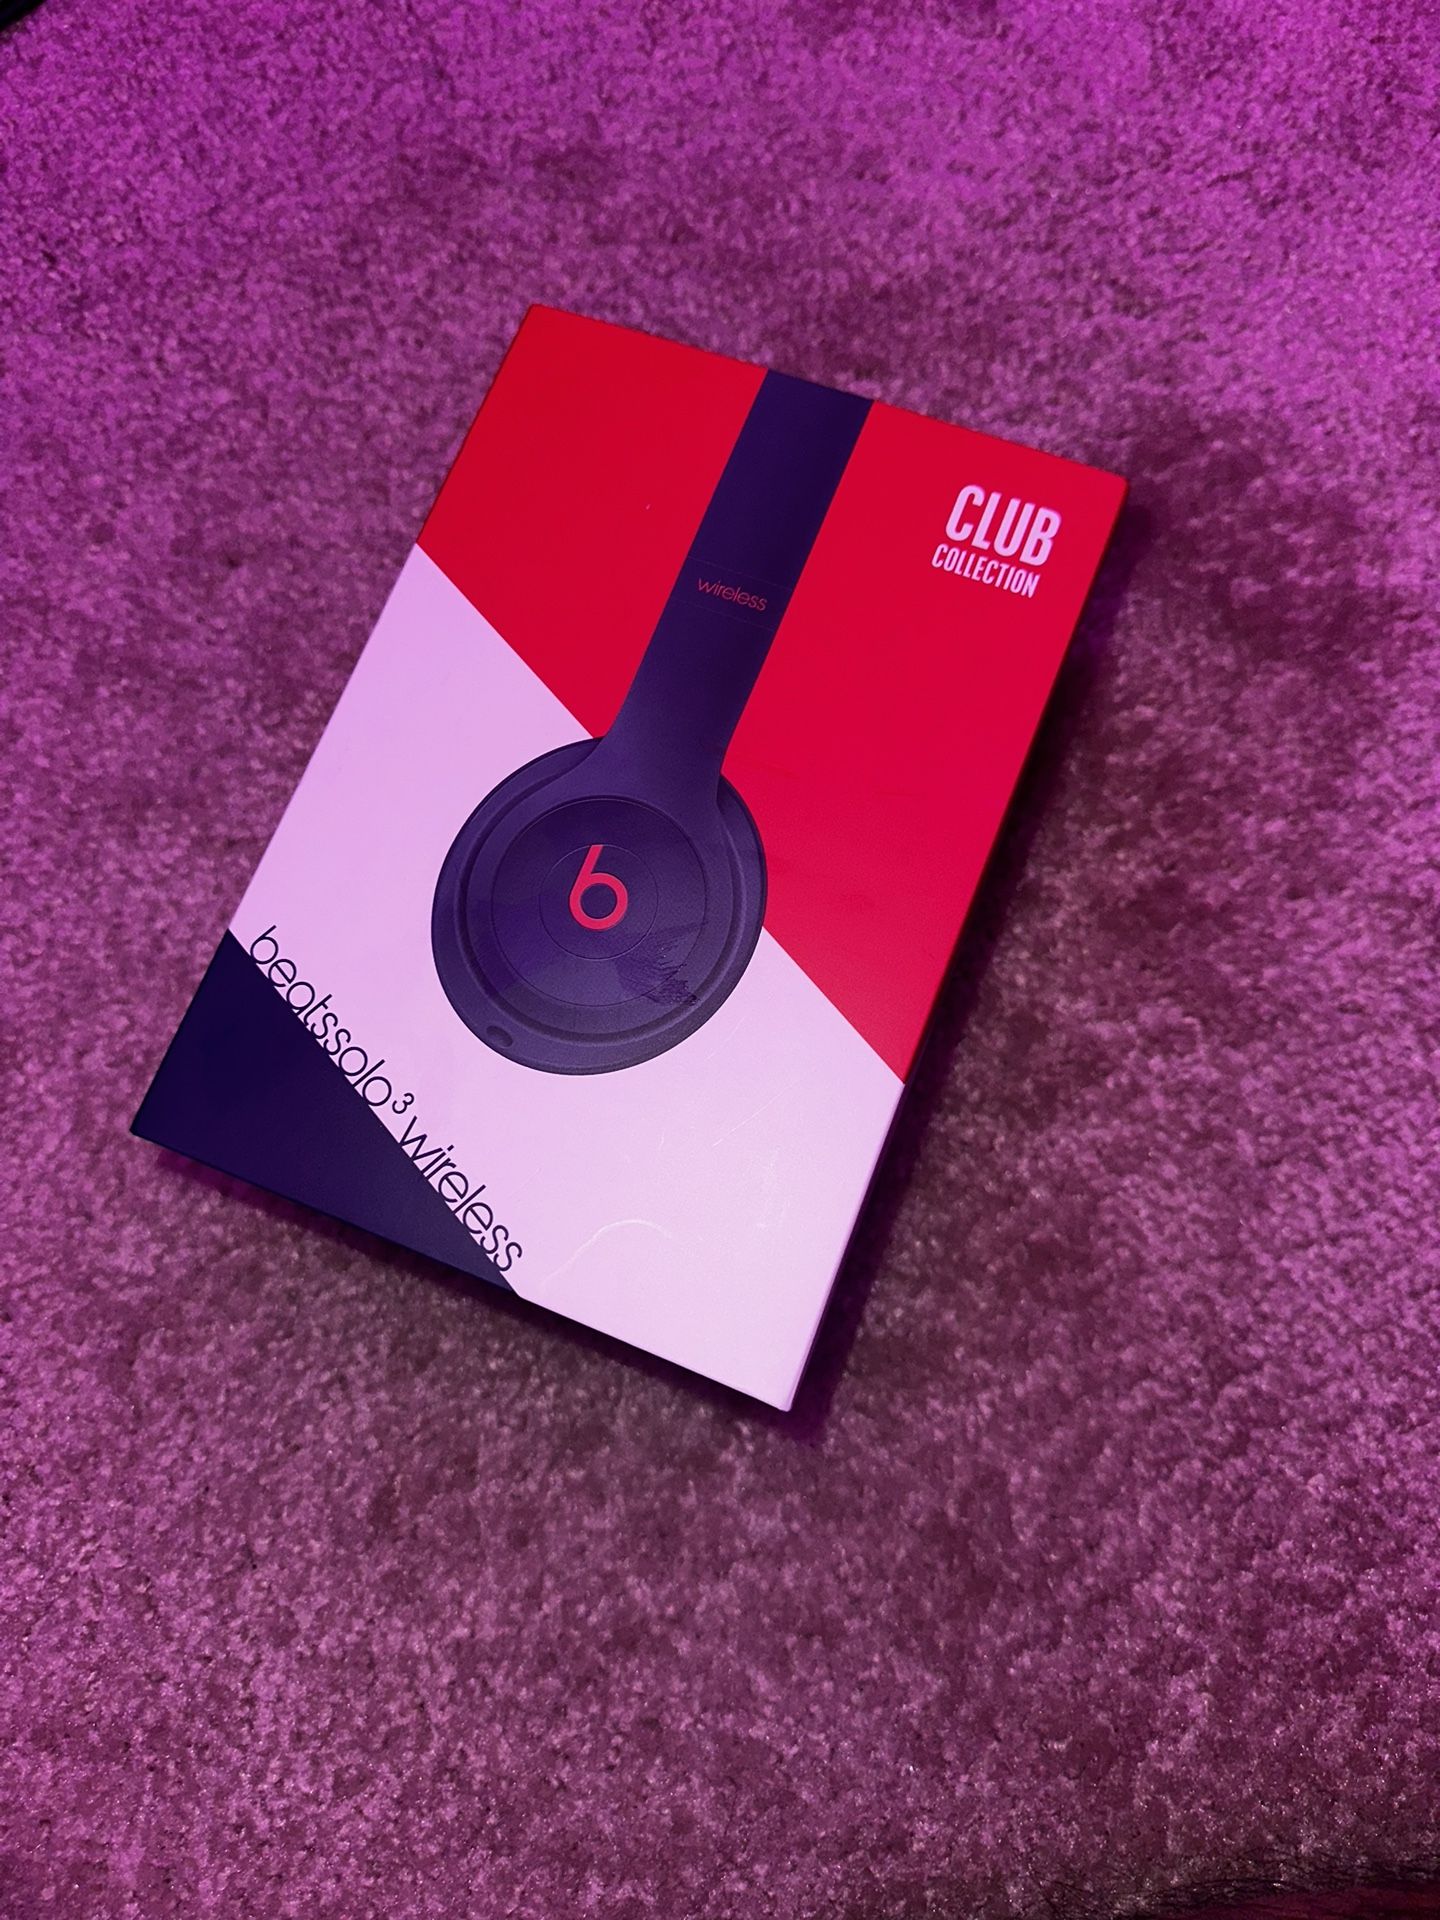 Beats Solo3 Wireless (Club Collection)